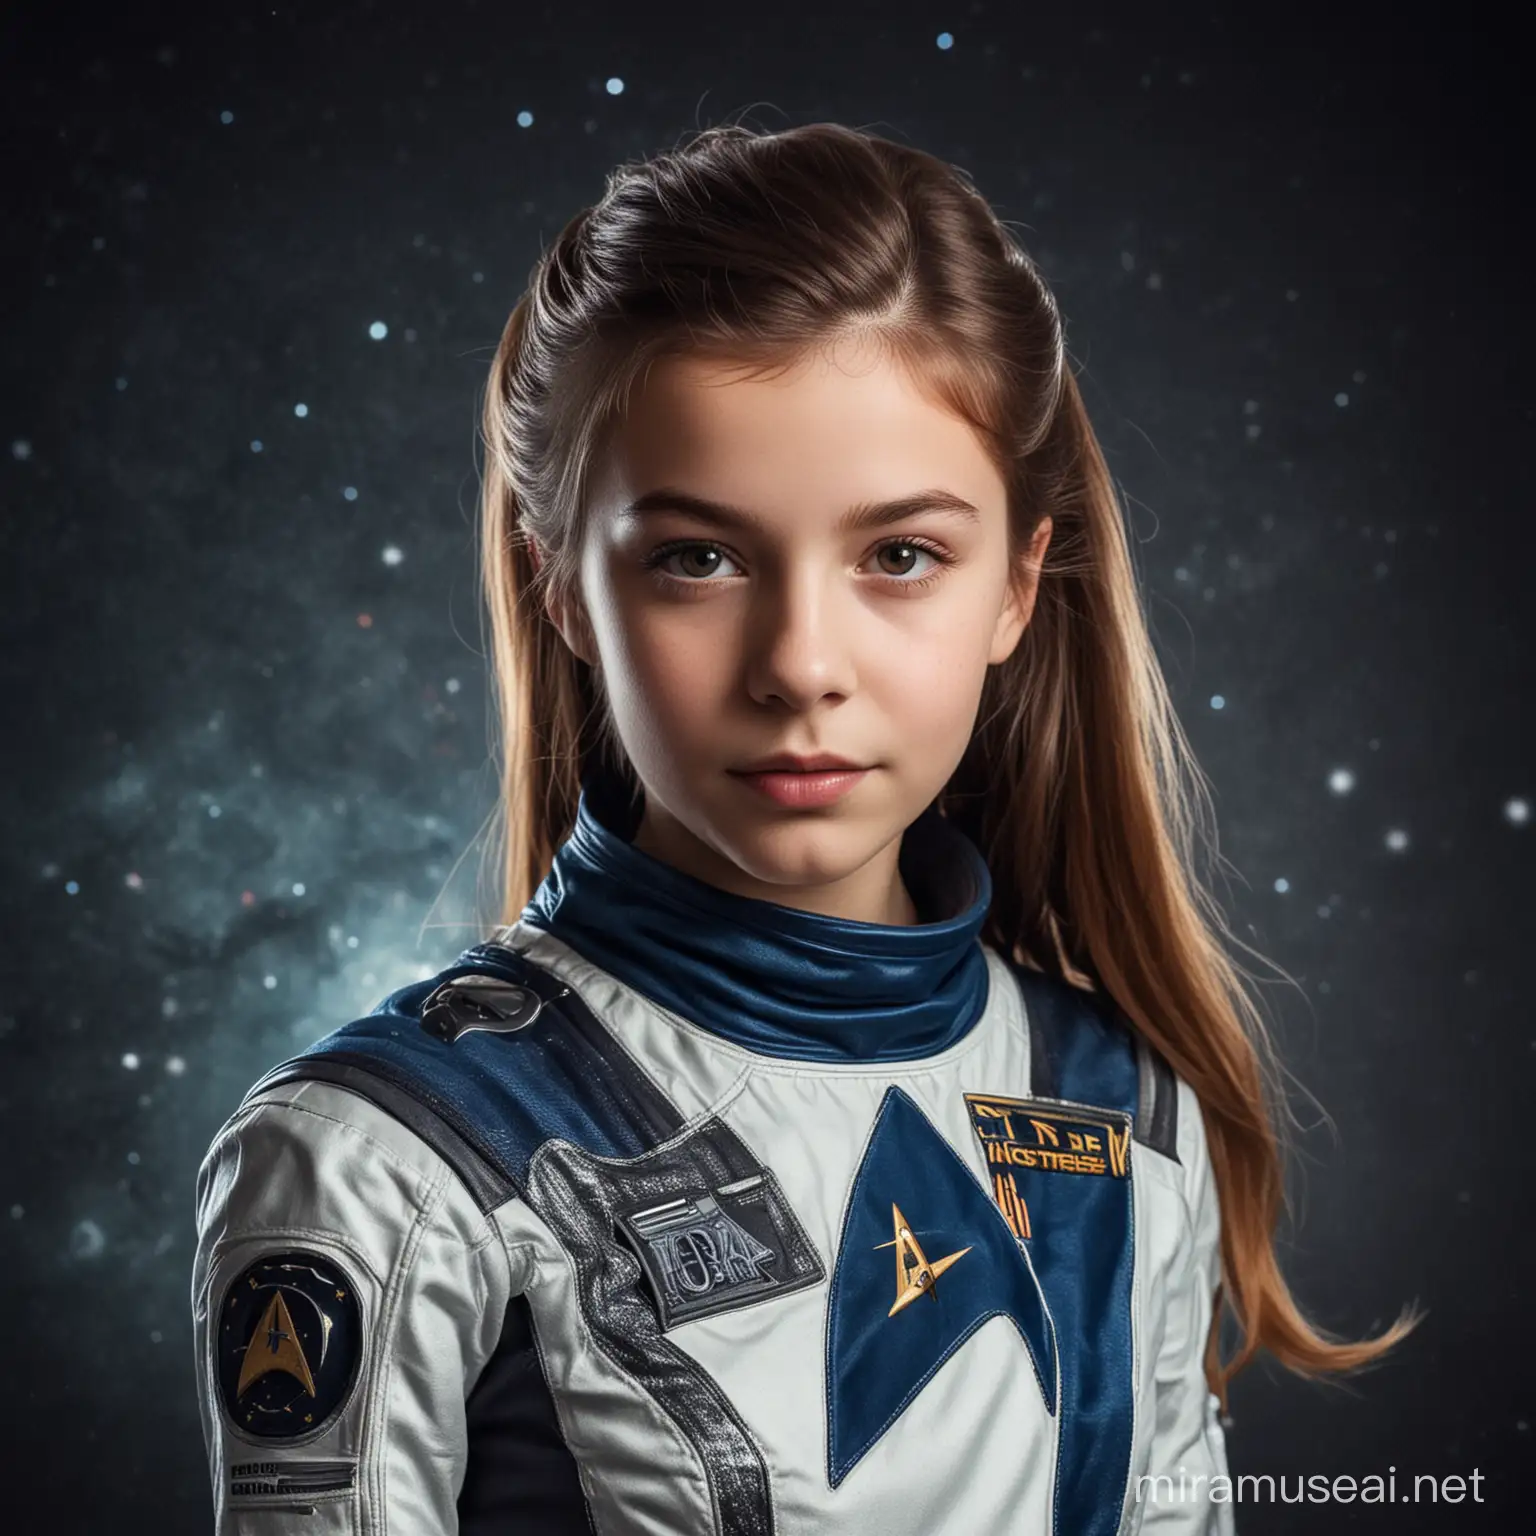 Starry Exploration Beautiful Young Girl in Space Suit with Star Trek Logo